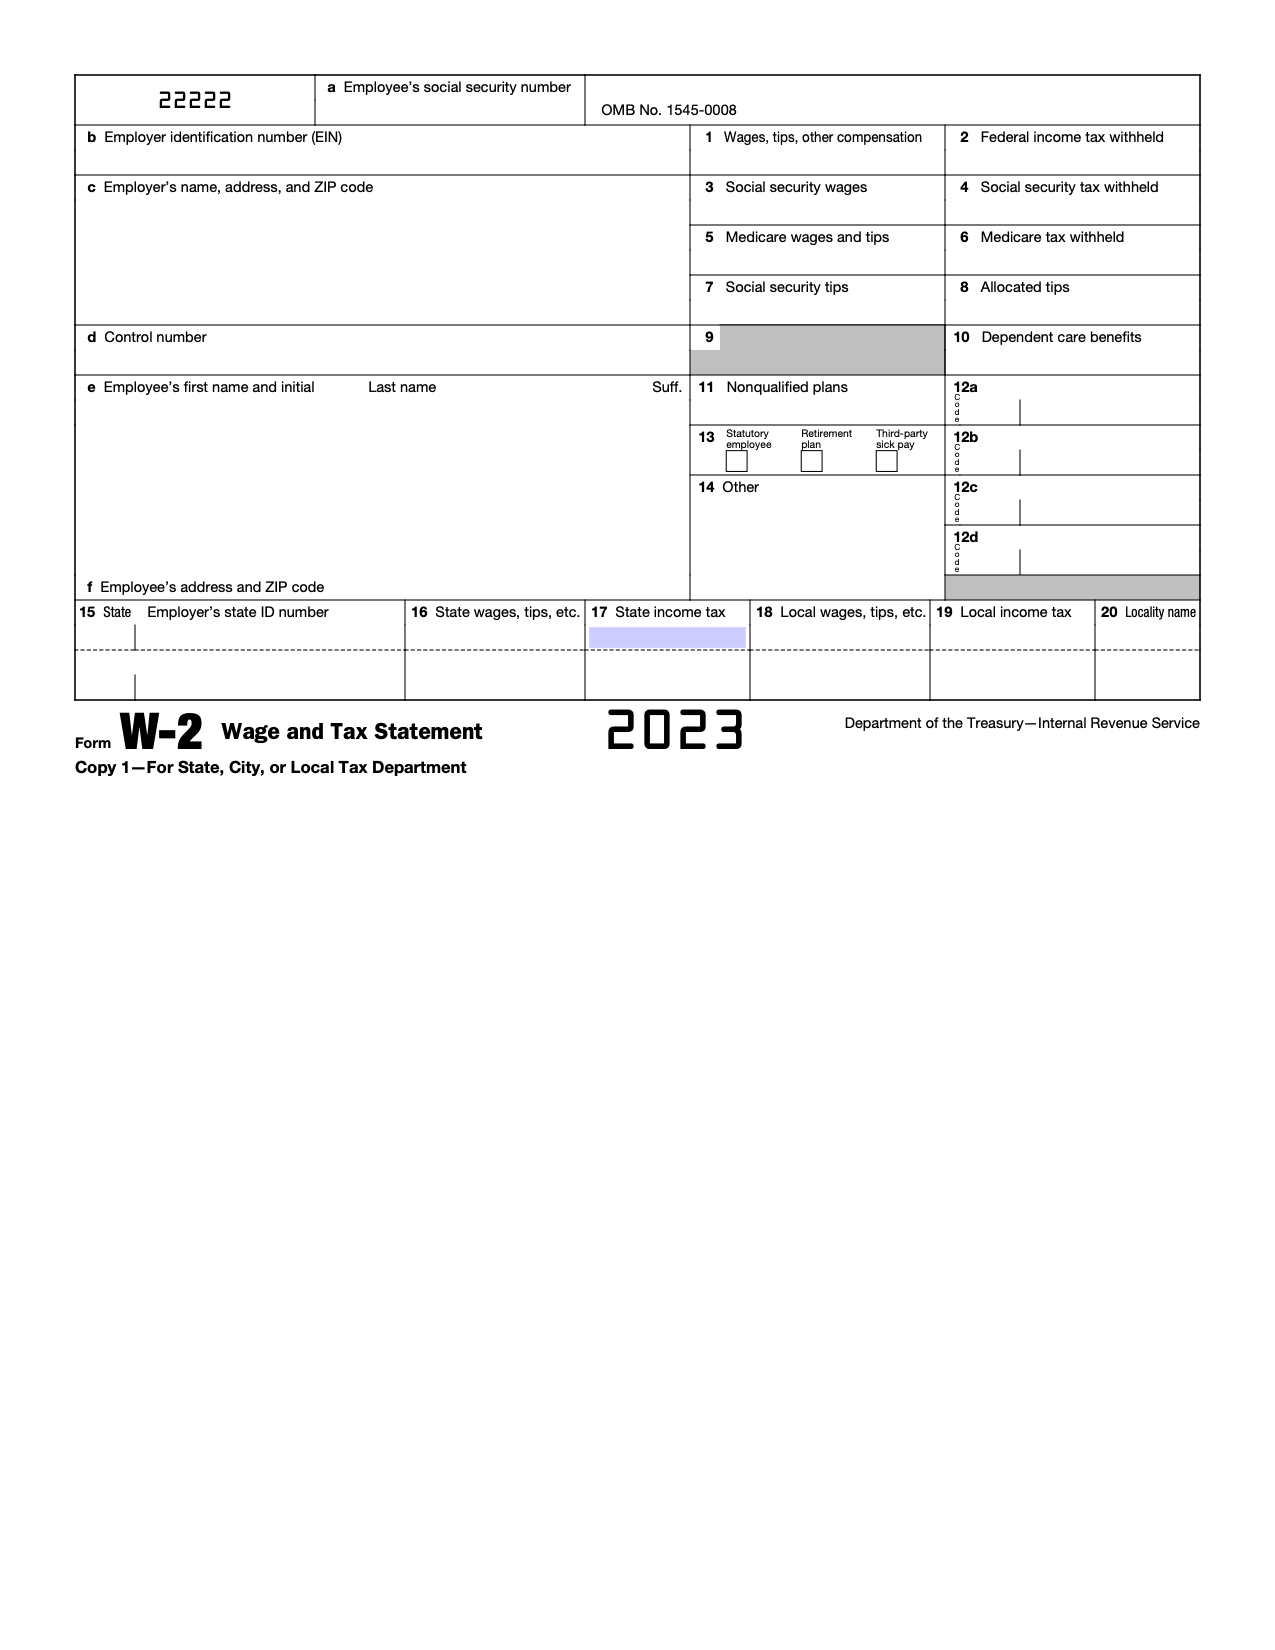 Free Irs Form W-2 | Wage And Tax Statement - Pdf – Eforms in 2022 Form W2